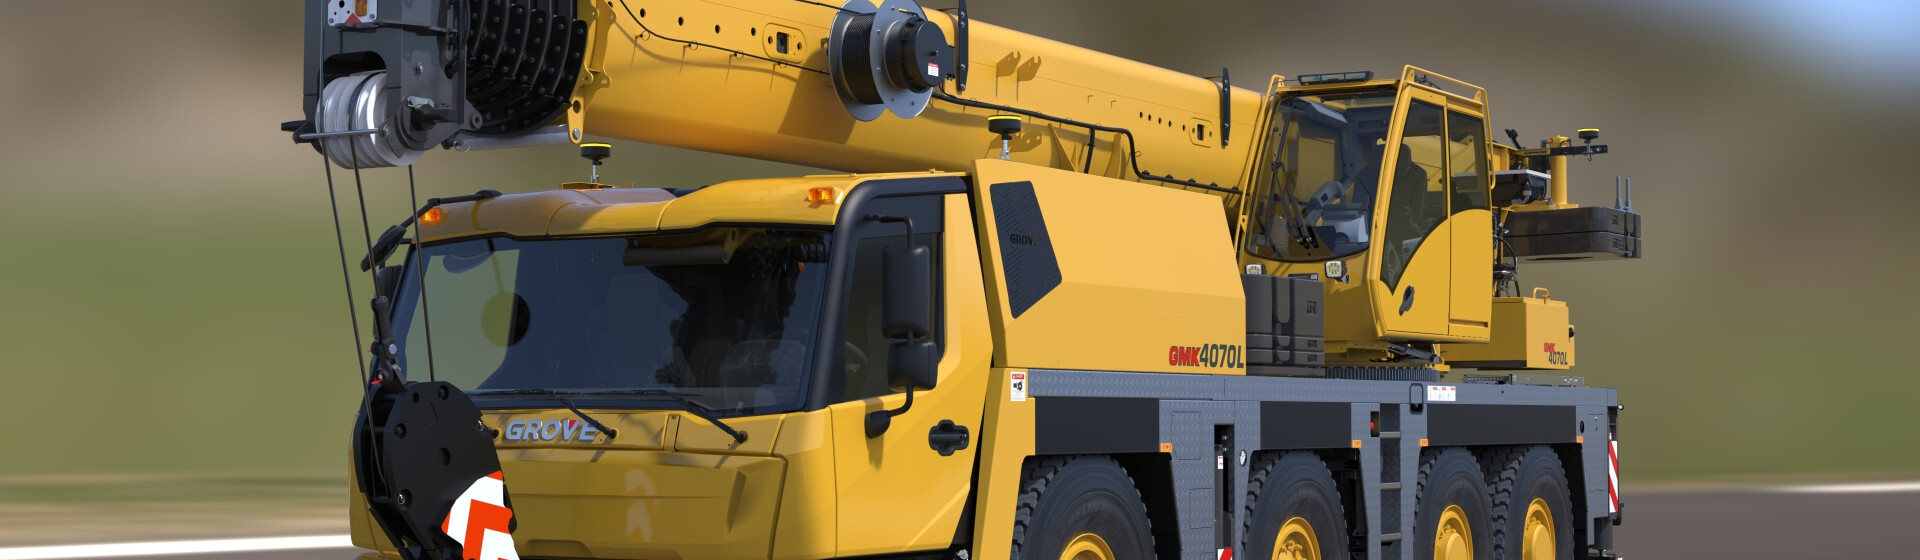 Grove-to-launch-GMK4070L-at-bauma-2022-to-expand-market-opportunities-for-four-axle-all-terrain-cranes.jpg